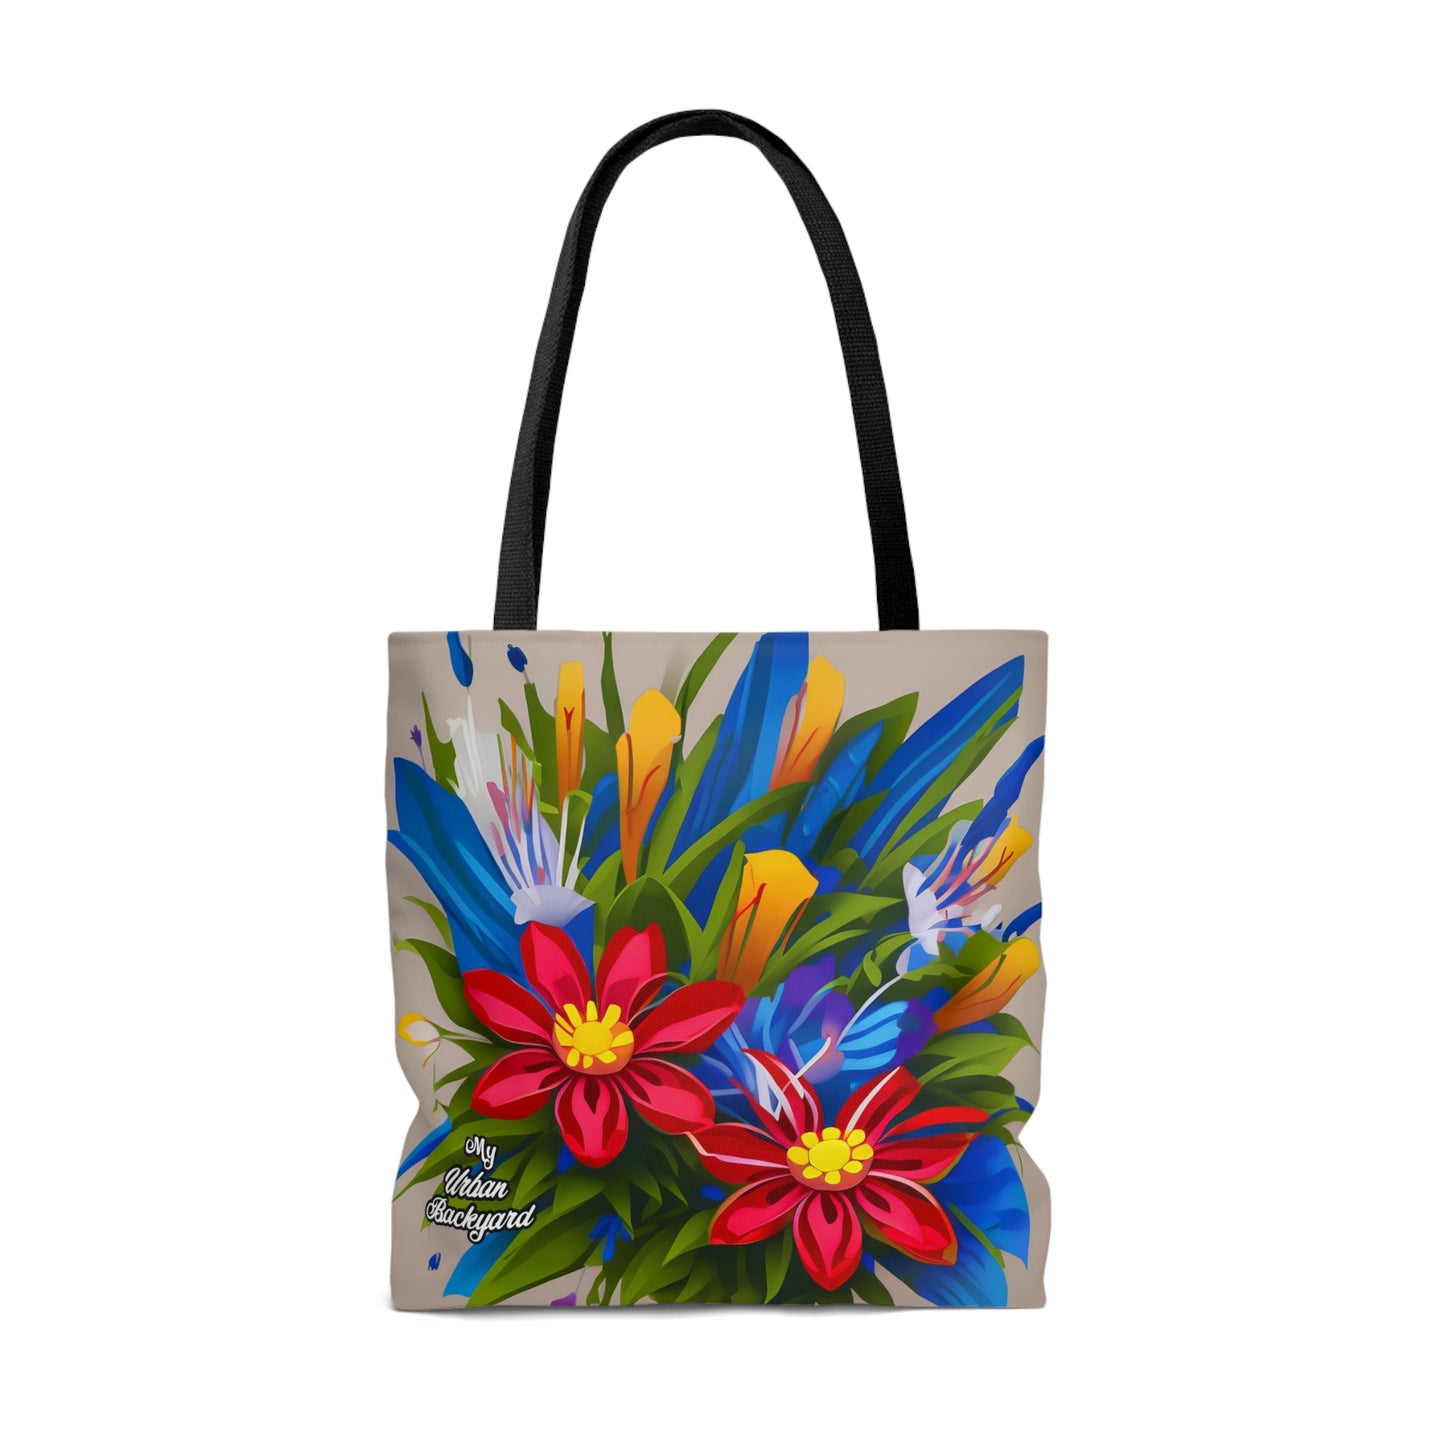 Vibrant Wildflowers, Tote Bag for Everyday Use - Durable and Functional